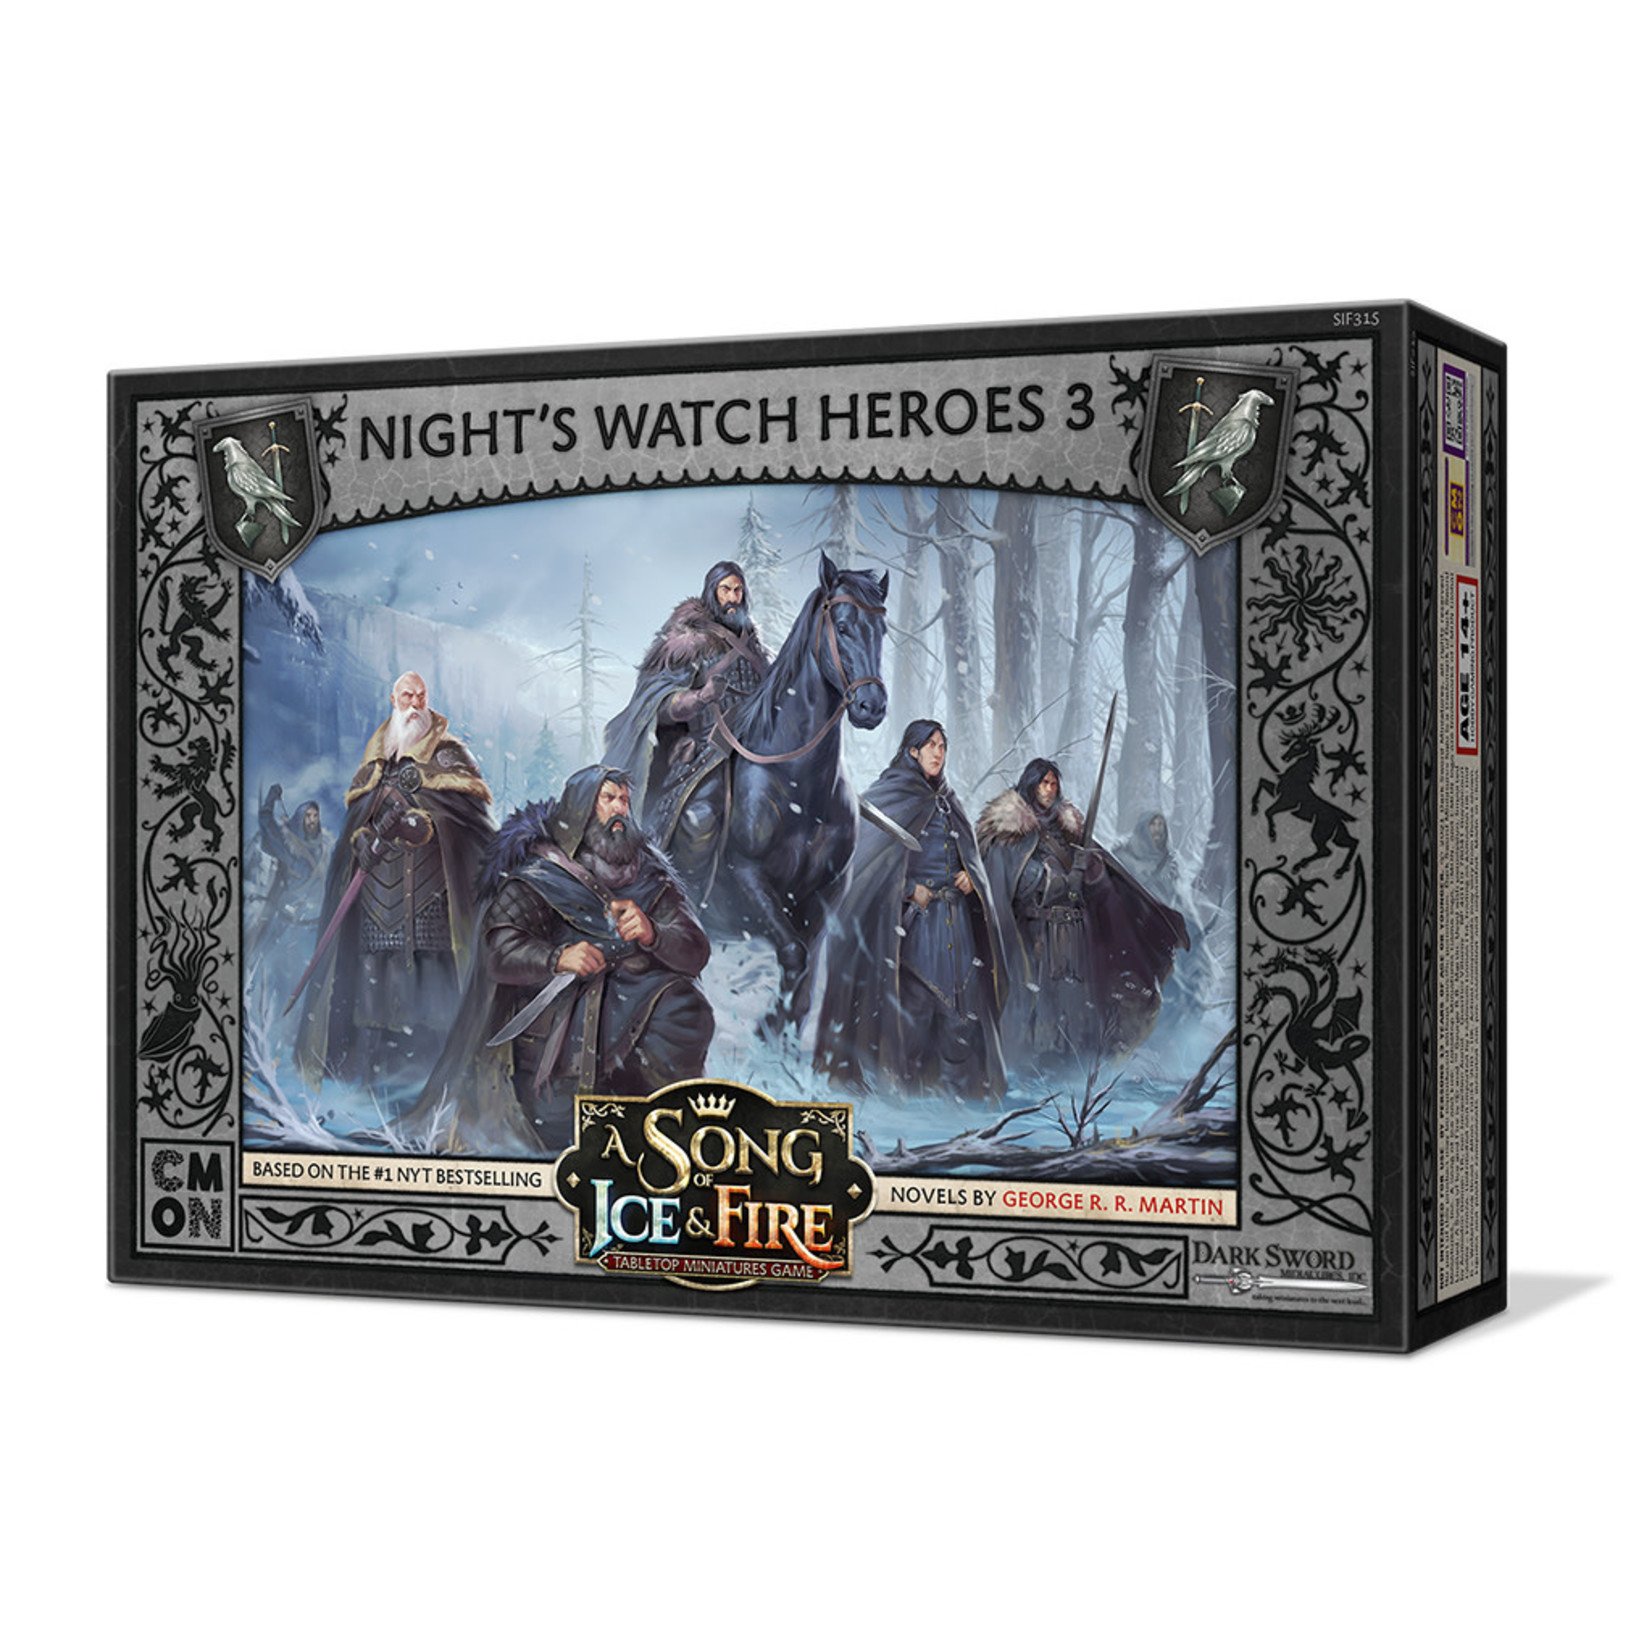 A Song of Ice and Fire: Nights Watch Heroes 3